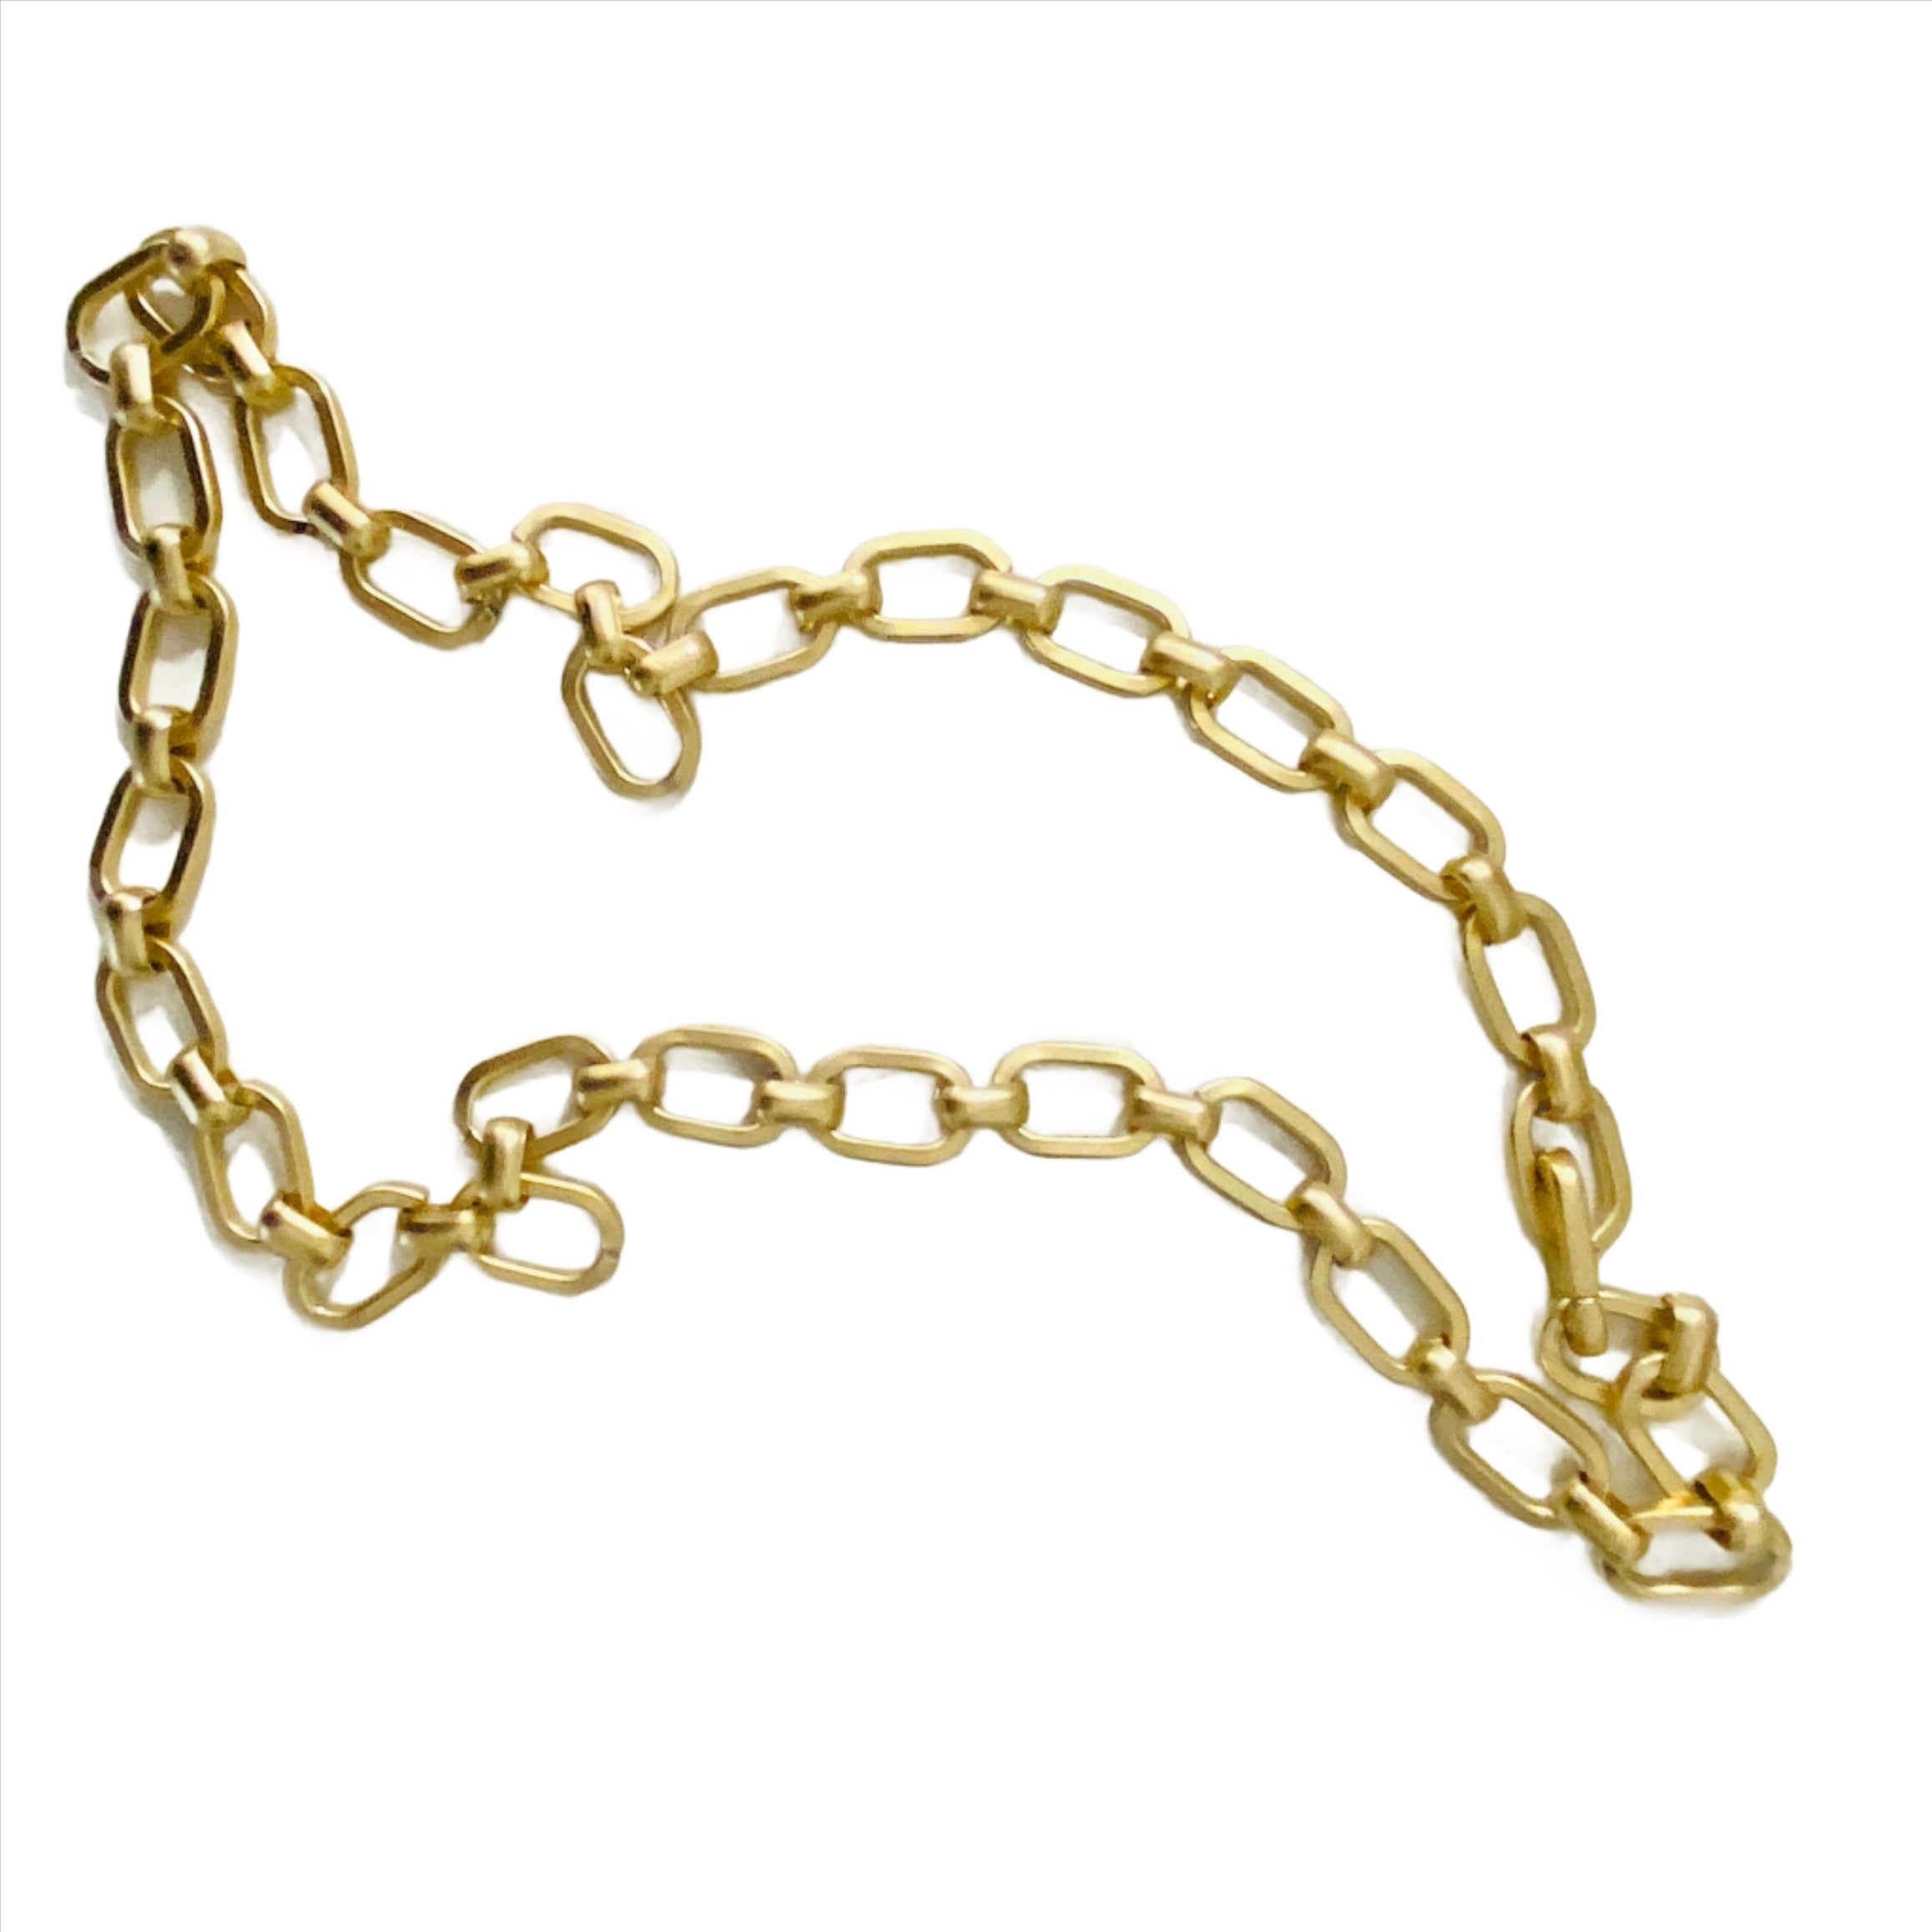 Solara Champagne Gold Link Chain Necklace in Three Sizes